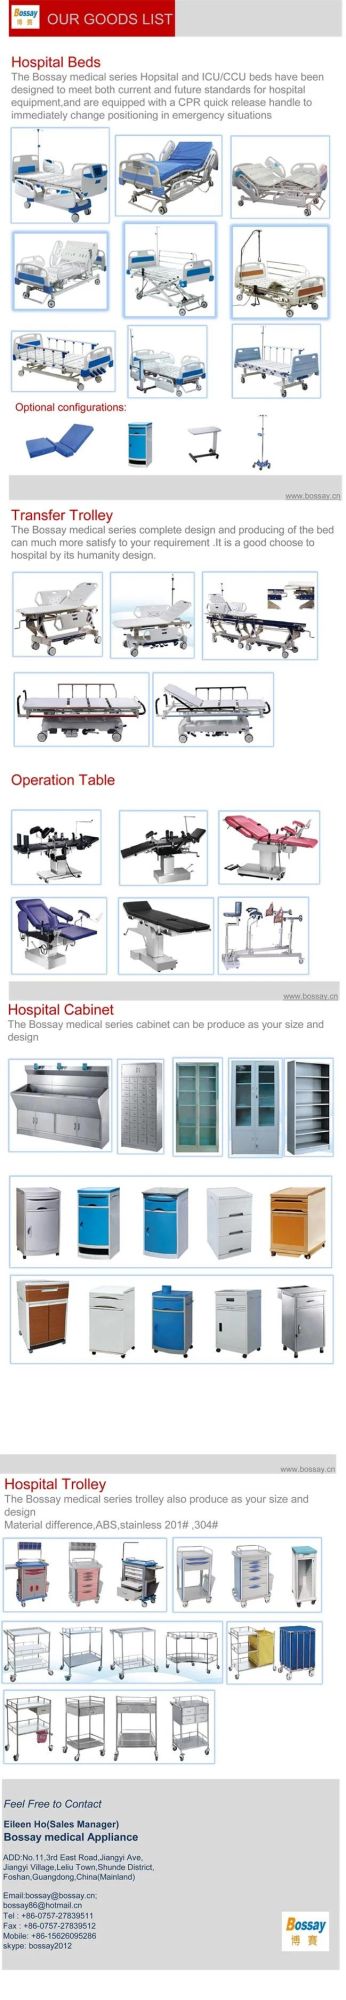 1 Crank Manual Hospital Bed One Function Manual Hospital Bed